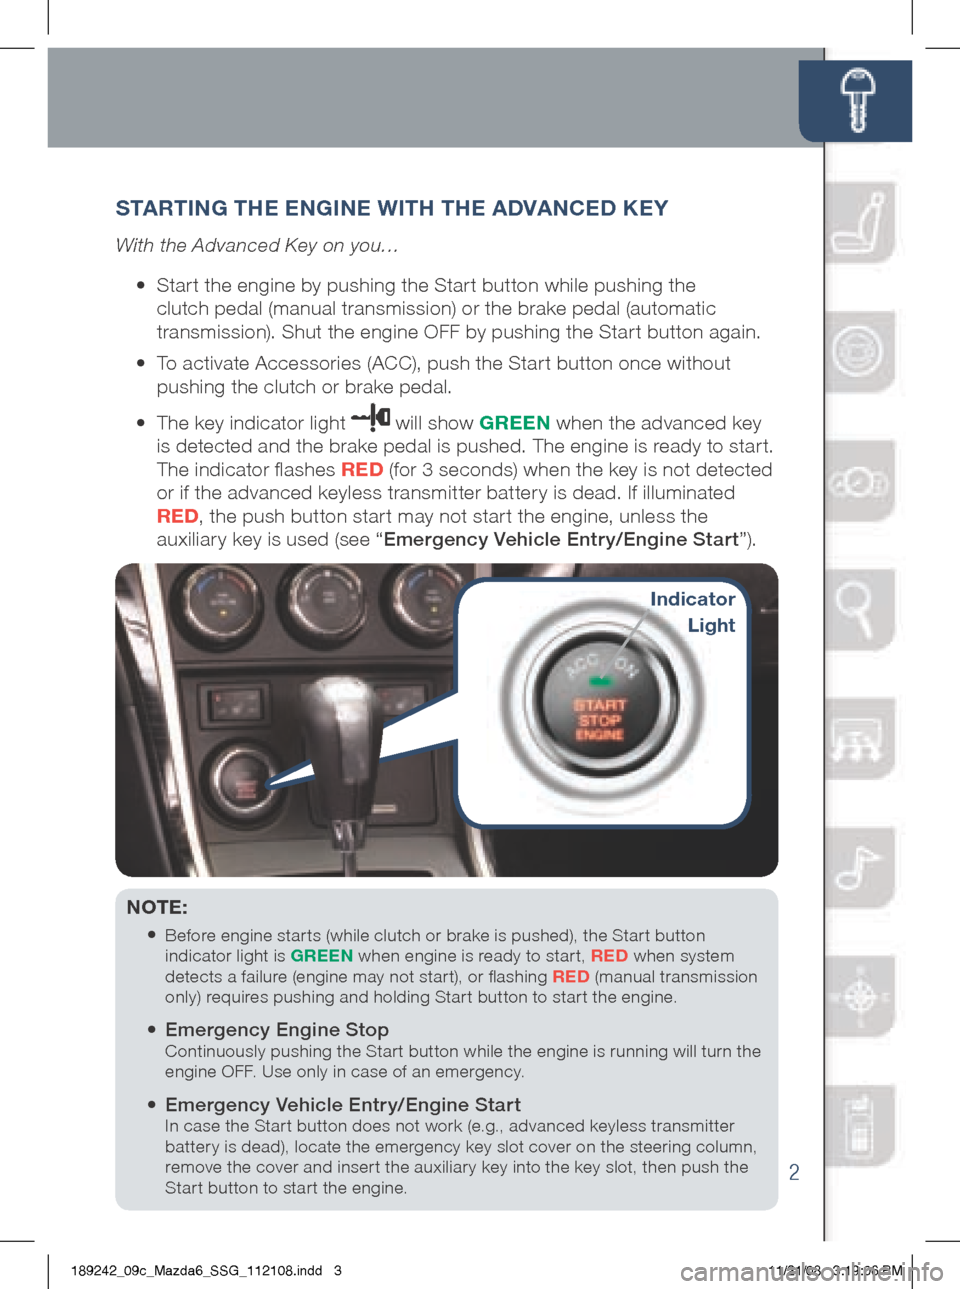 MAZDA MODEL 6 2009  Smart Start Guide (in English) 2
Release  
Button
S TART iN g THE EN giNE wi TH THE A DVANCED K EY
With the Advanced Key on you…
	 •		 Start	the	engine	by	pushing	the	Start	button	while	pushing	the 	
clutch	pedal	(manual	transm